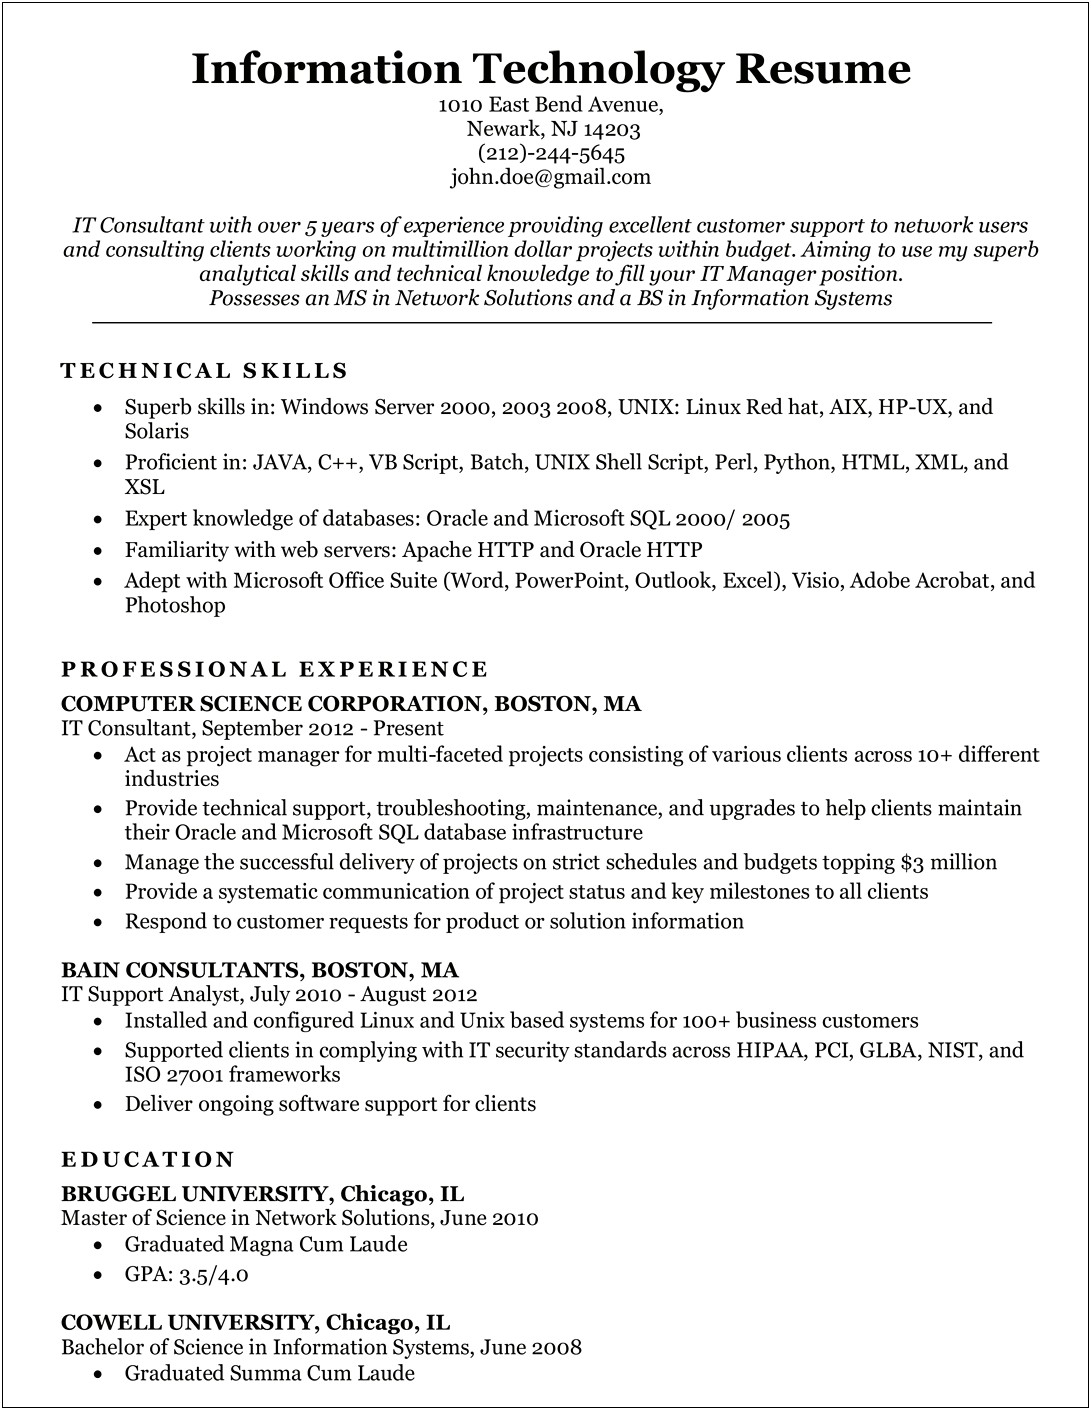 College Resume Information Technology Example